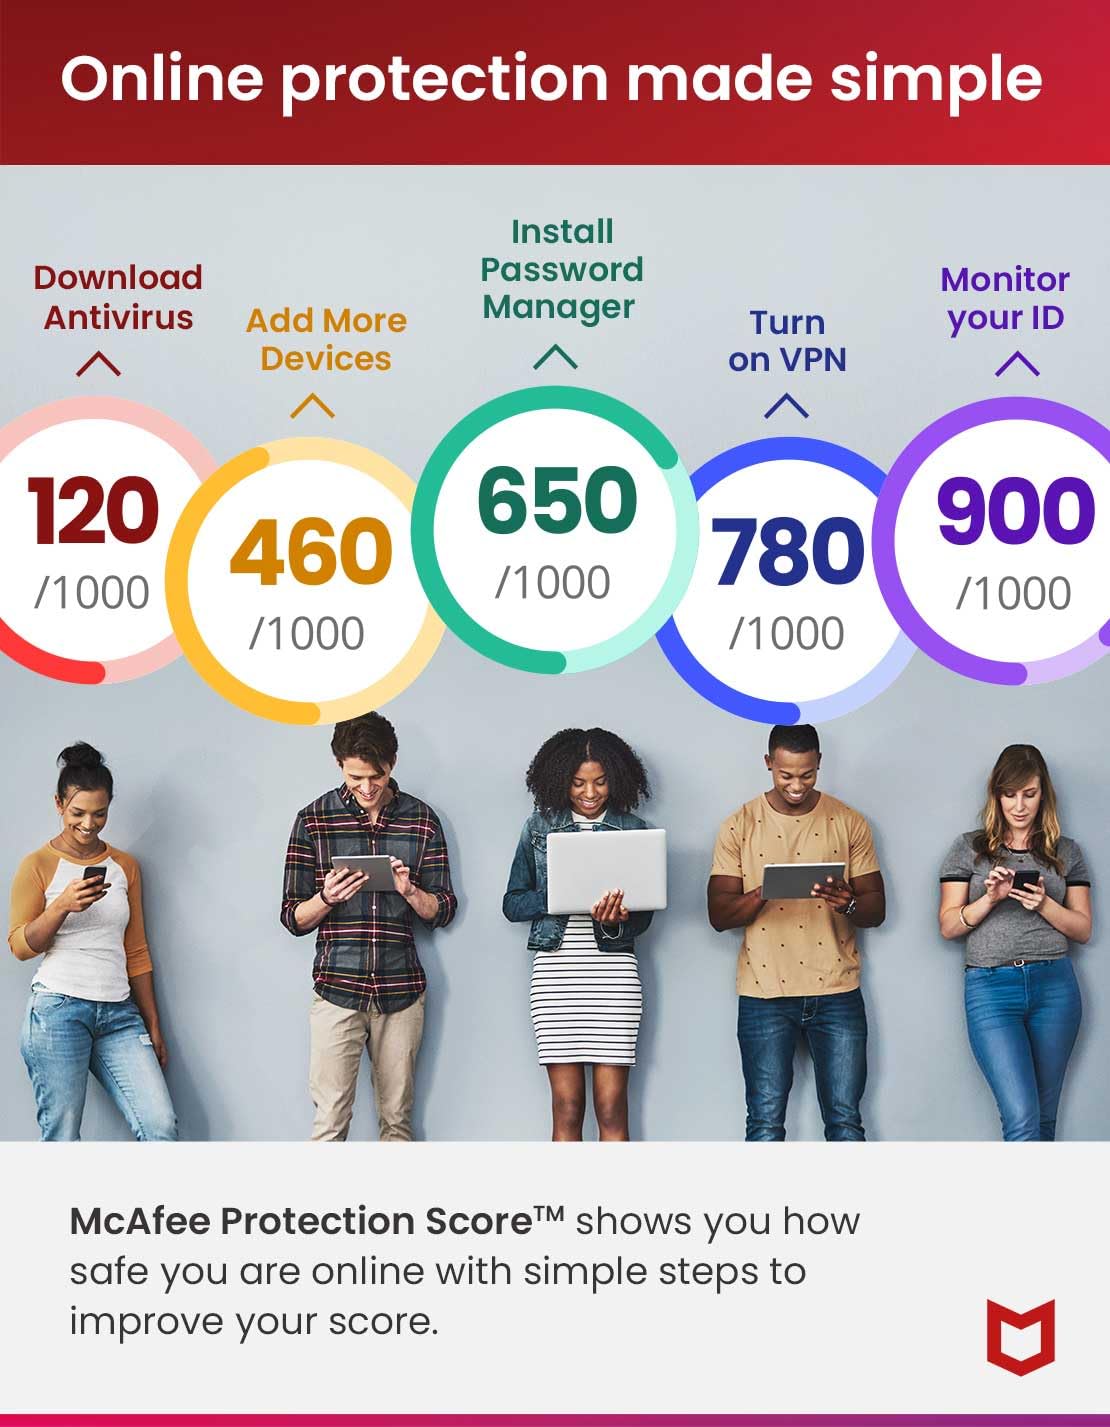 McAfee Total Protection 2024 Ready | 1 Device | Cybersecurity Software Includes Antivirus, Secure VPN, Password Manager, Dark Web Monitoring | Download